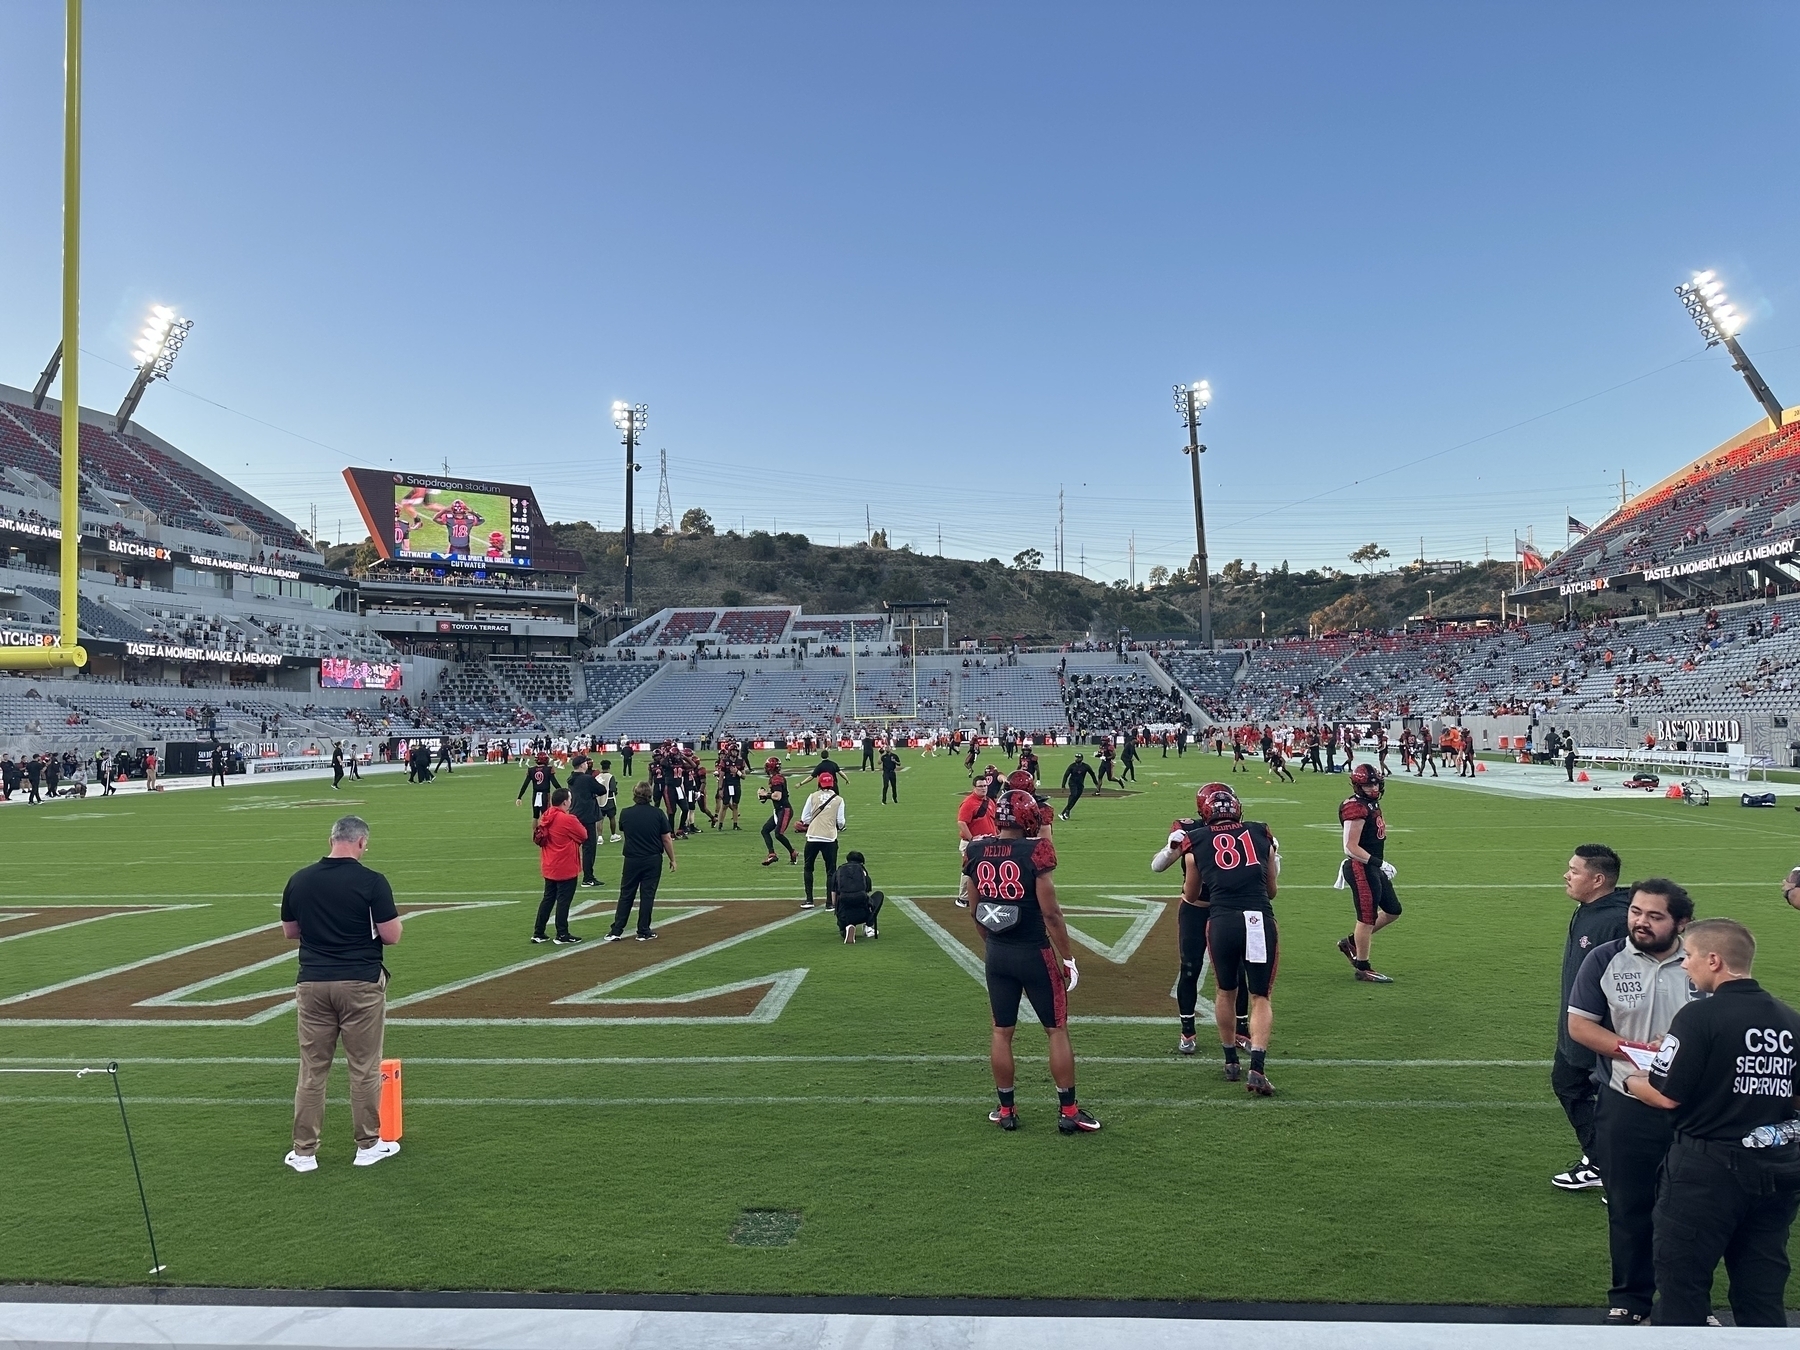 Players warming up on the field at Snapdragon Stadium in San Diego, California, USA.